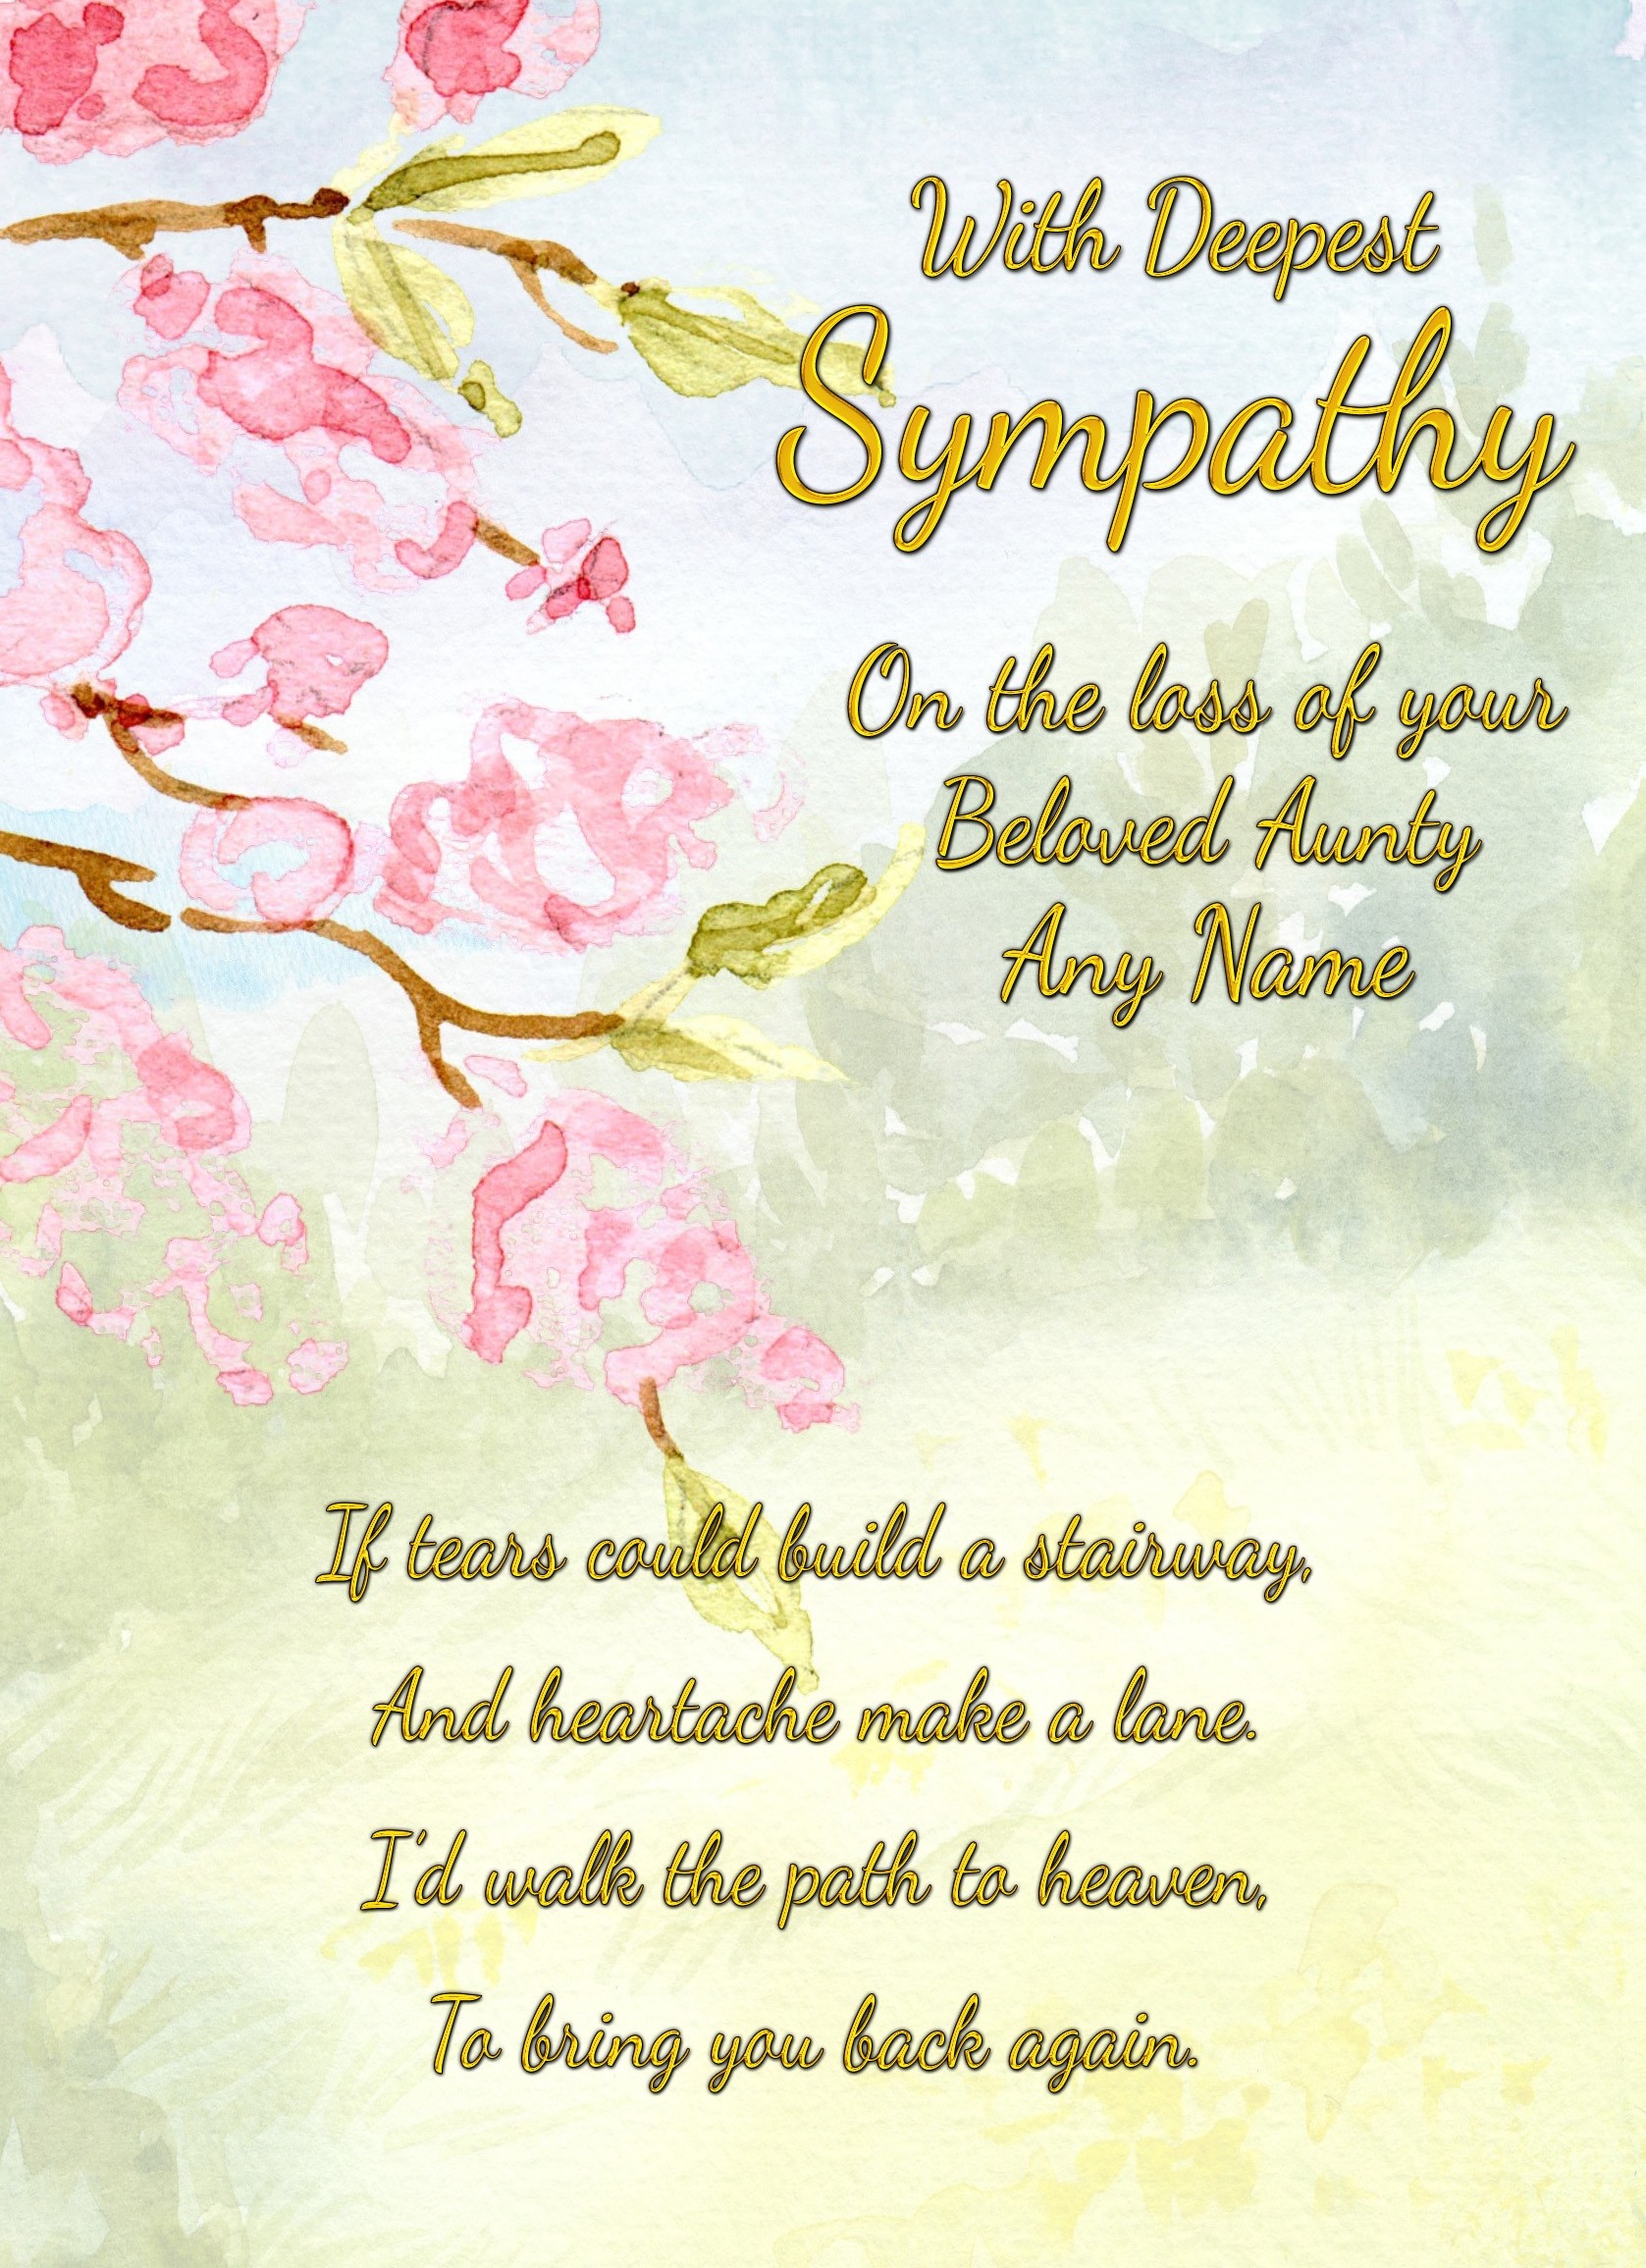 Personalised Sympathy Bereavement Card (With Deepest Sympathy, Beloved Aunty)